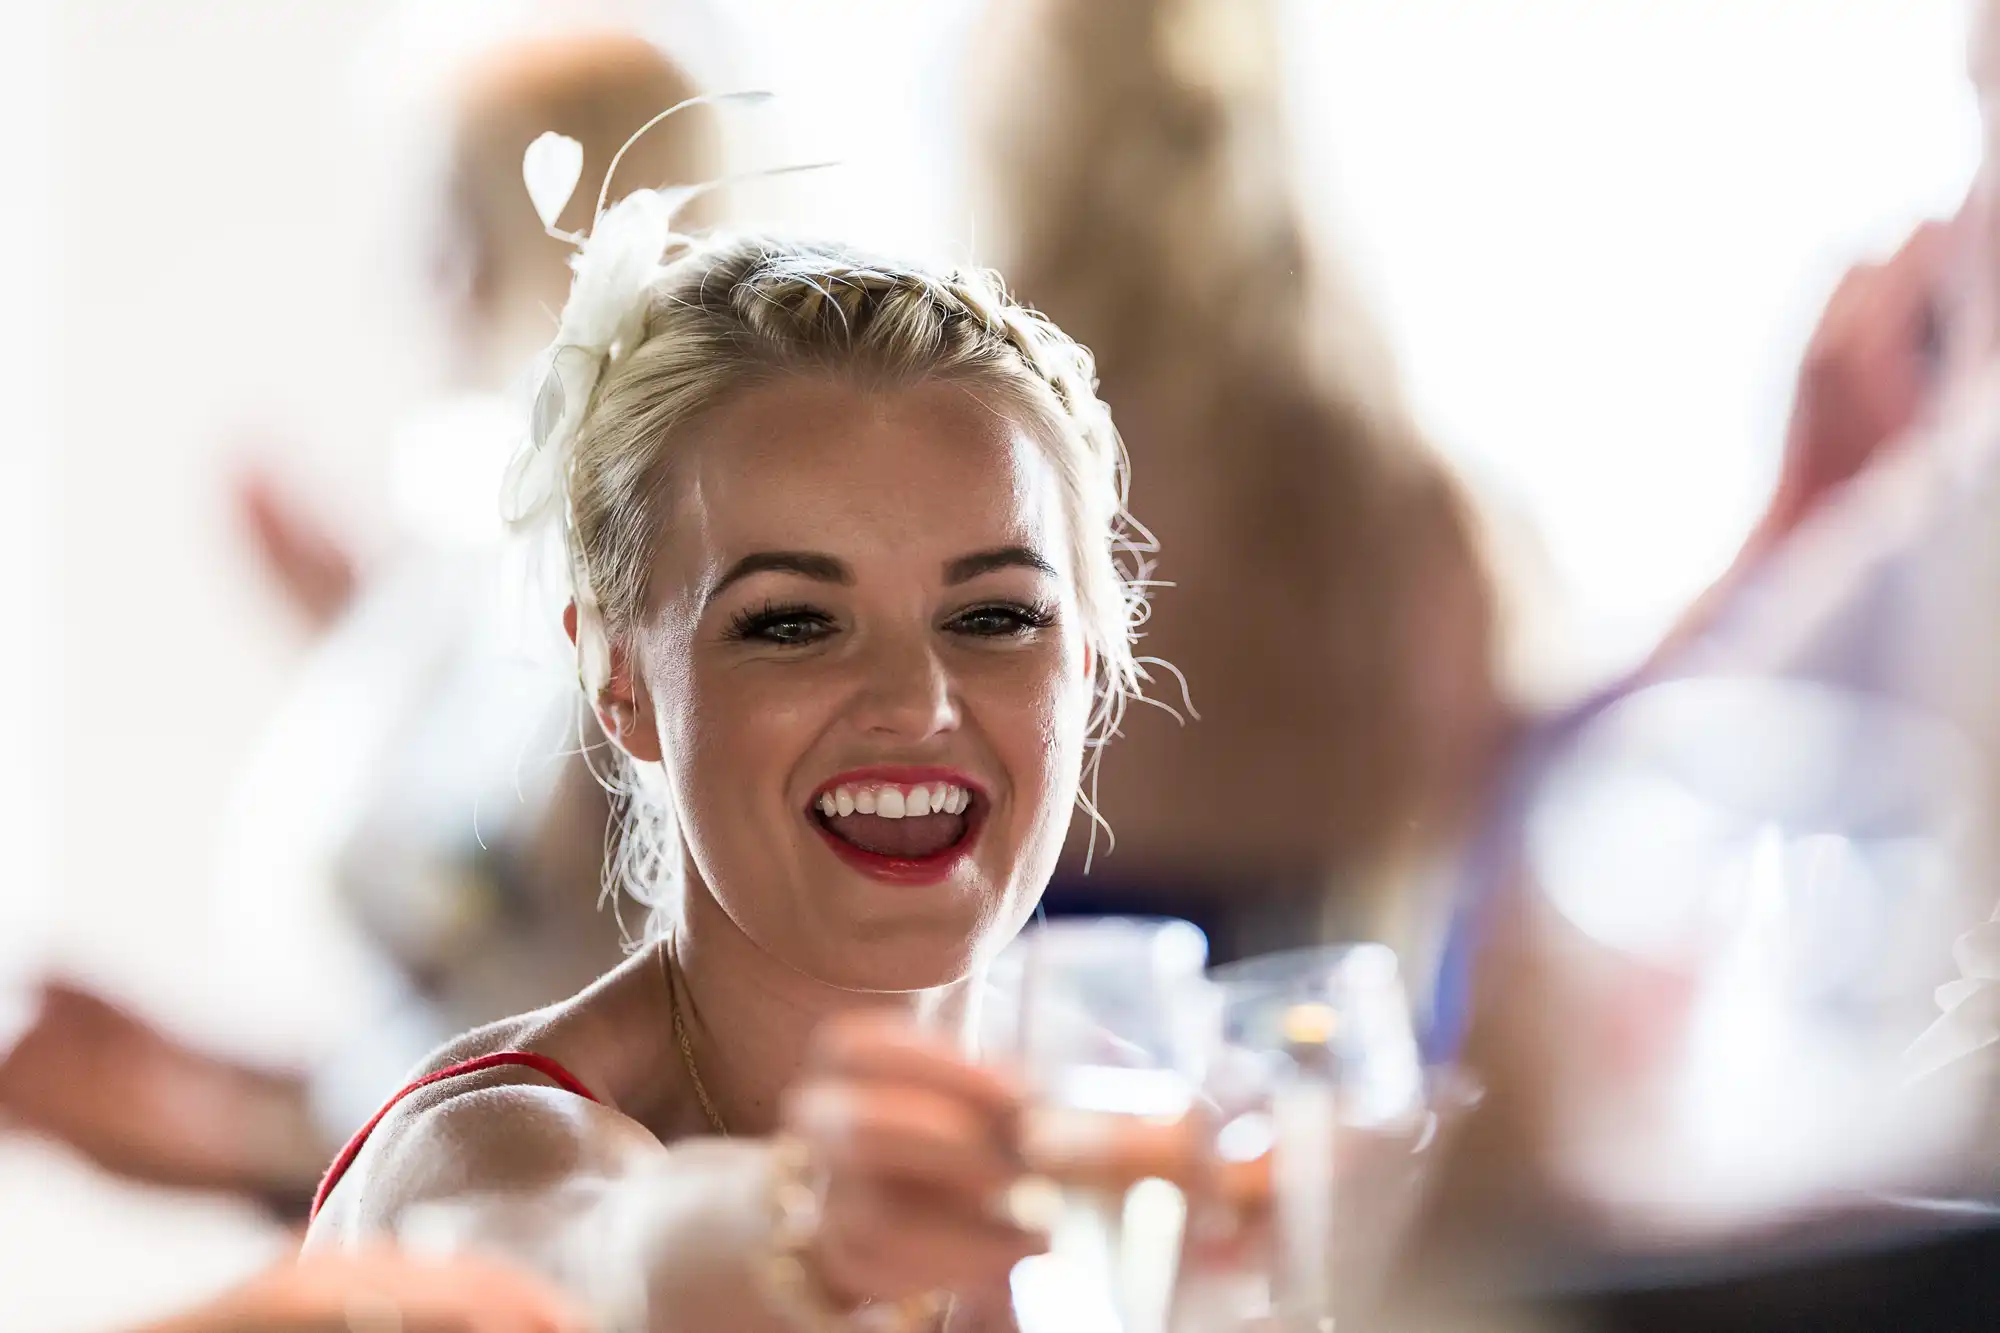 A woman, dressed in formal attire and a white headpiece, smiling and reaching out with a glass in hand at a social gathering.